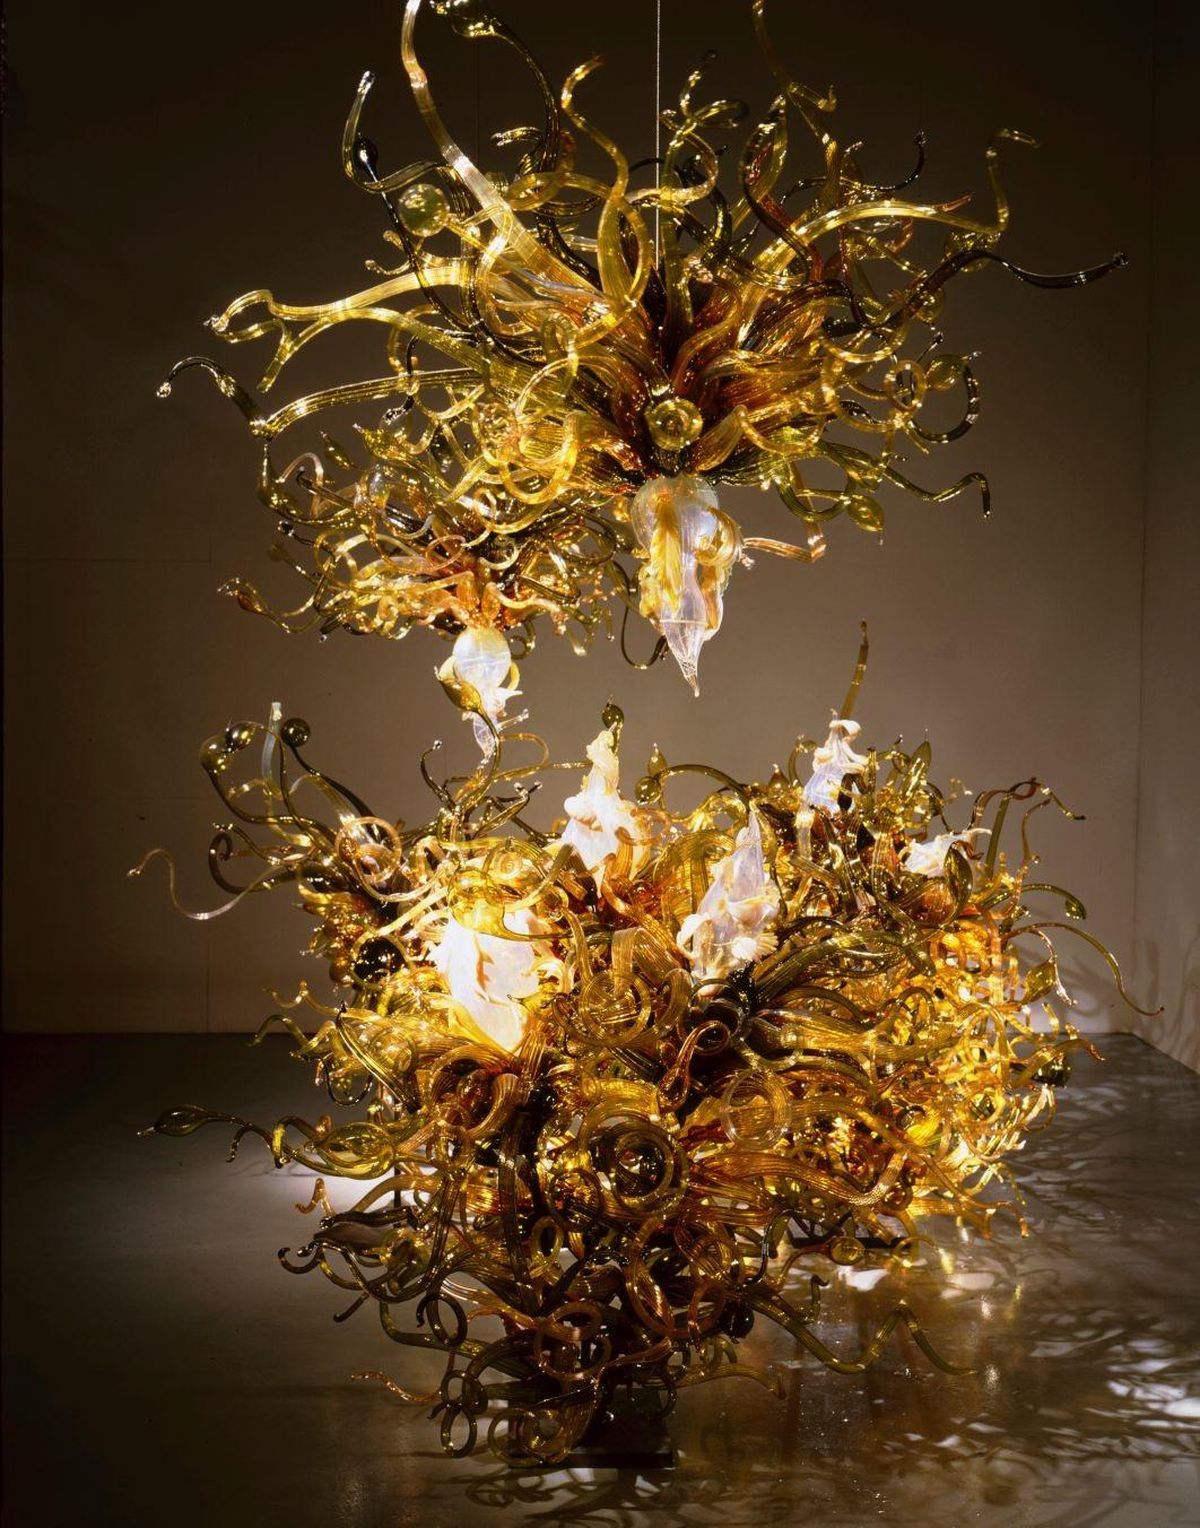 Dale Chihuly’s Laguna Murano Chandelier was blown at the end of the exhibit “Chihuly Over Venice” in September 1996. It’s among the works featured in “Luminous: Dale Chihuly and the Studio Glass Movement,” which opens Saturday at the Northwest Museum of Arts and Culture. (Courtesy photo)